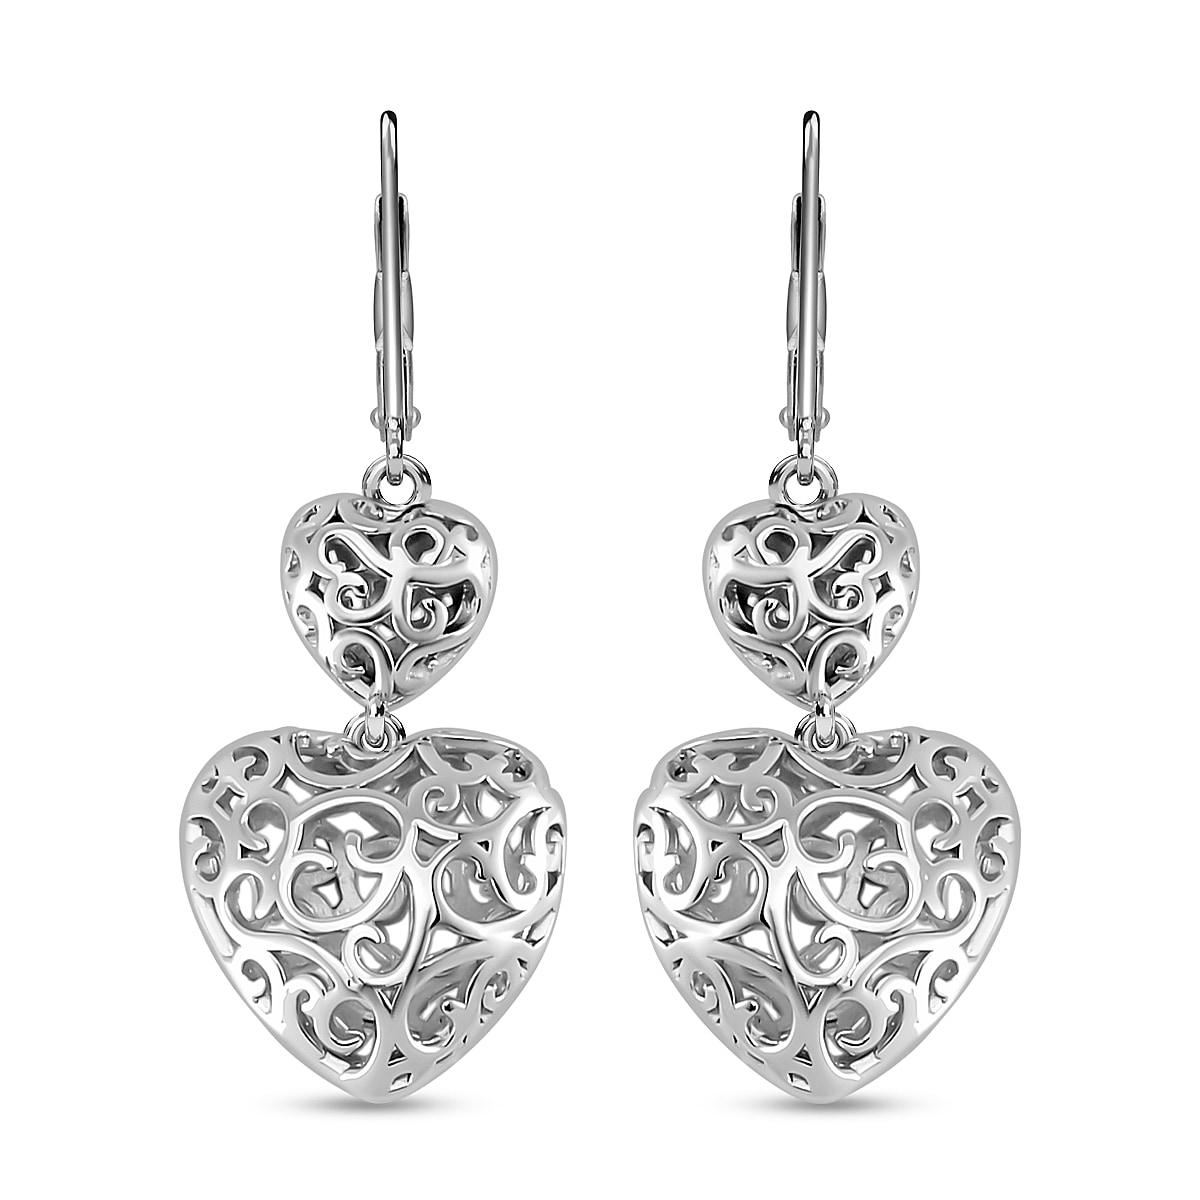 LUCY Q - Rhodium Overlay Sterling Silver Earrings, Silver Wt. 7.0 Gms